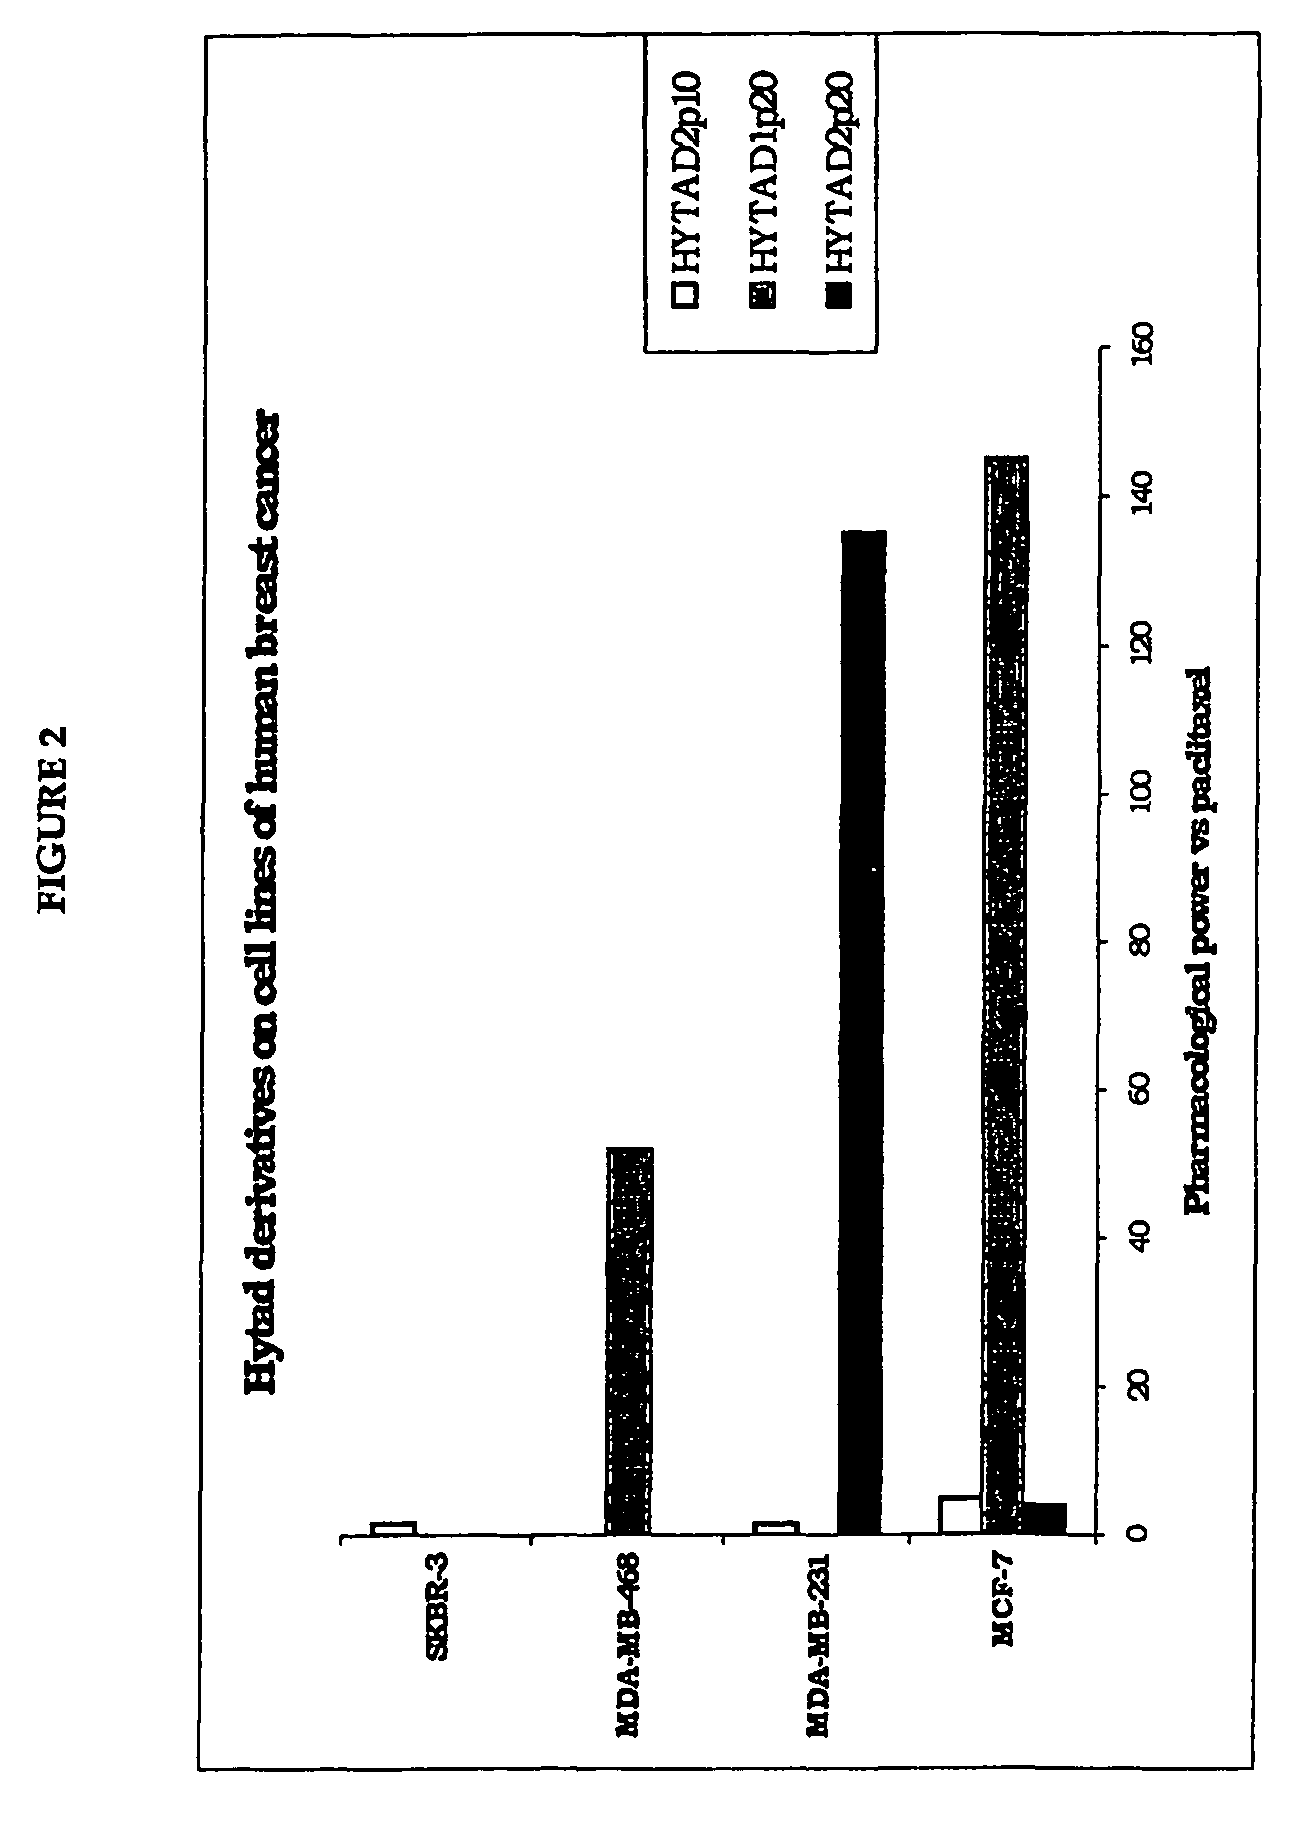 Taxanes covalently bounded to hyaluronic acid or hyaluronic acid derivatives